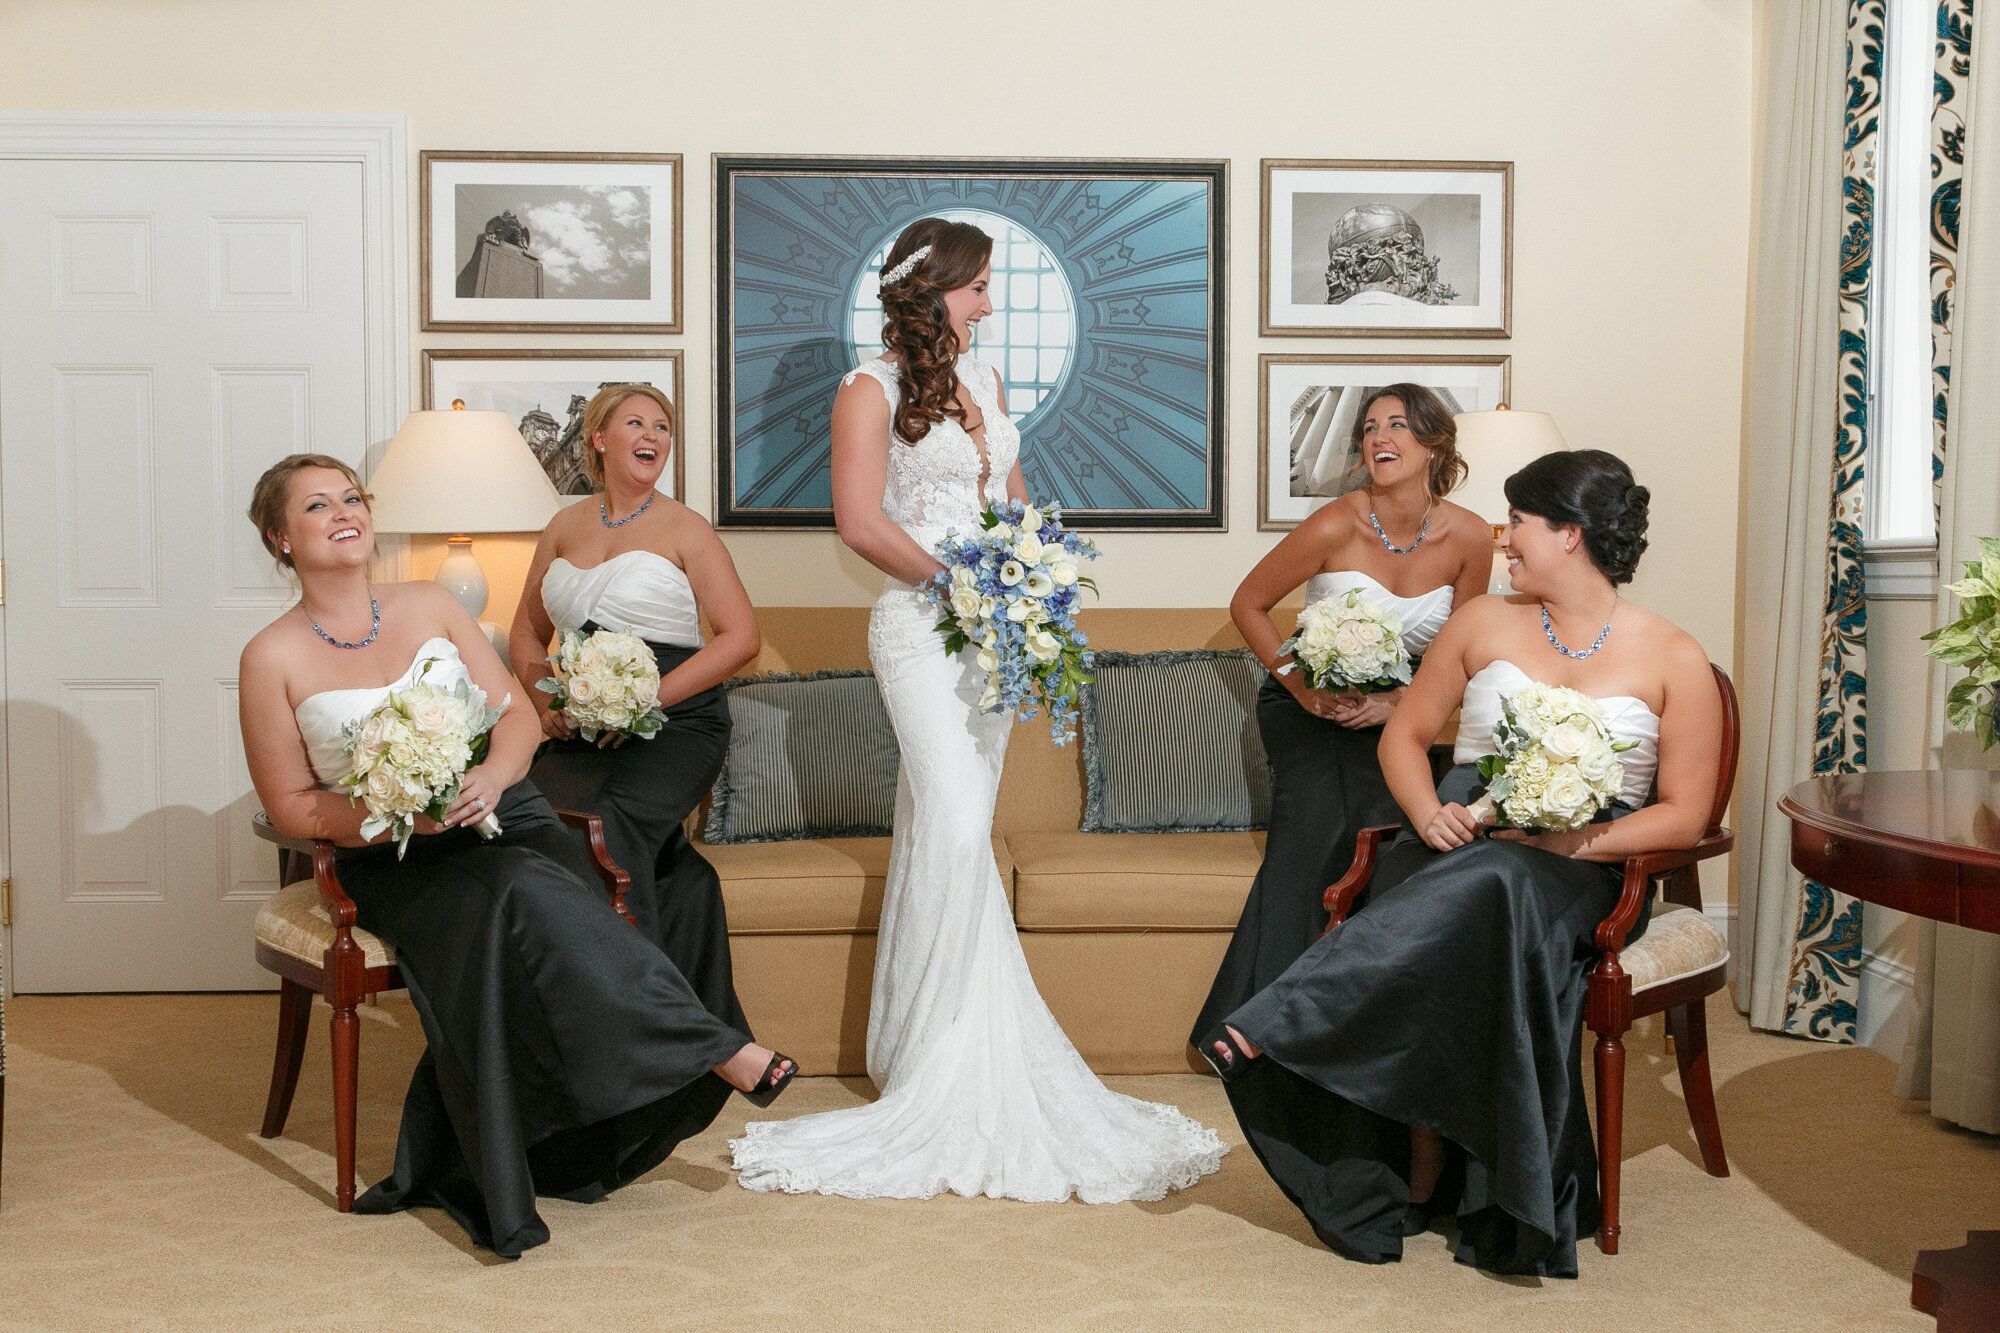 amanda laughing with her bridesmaids